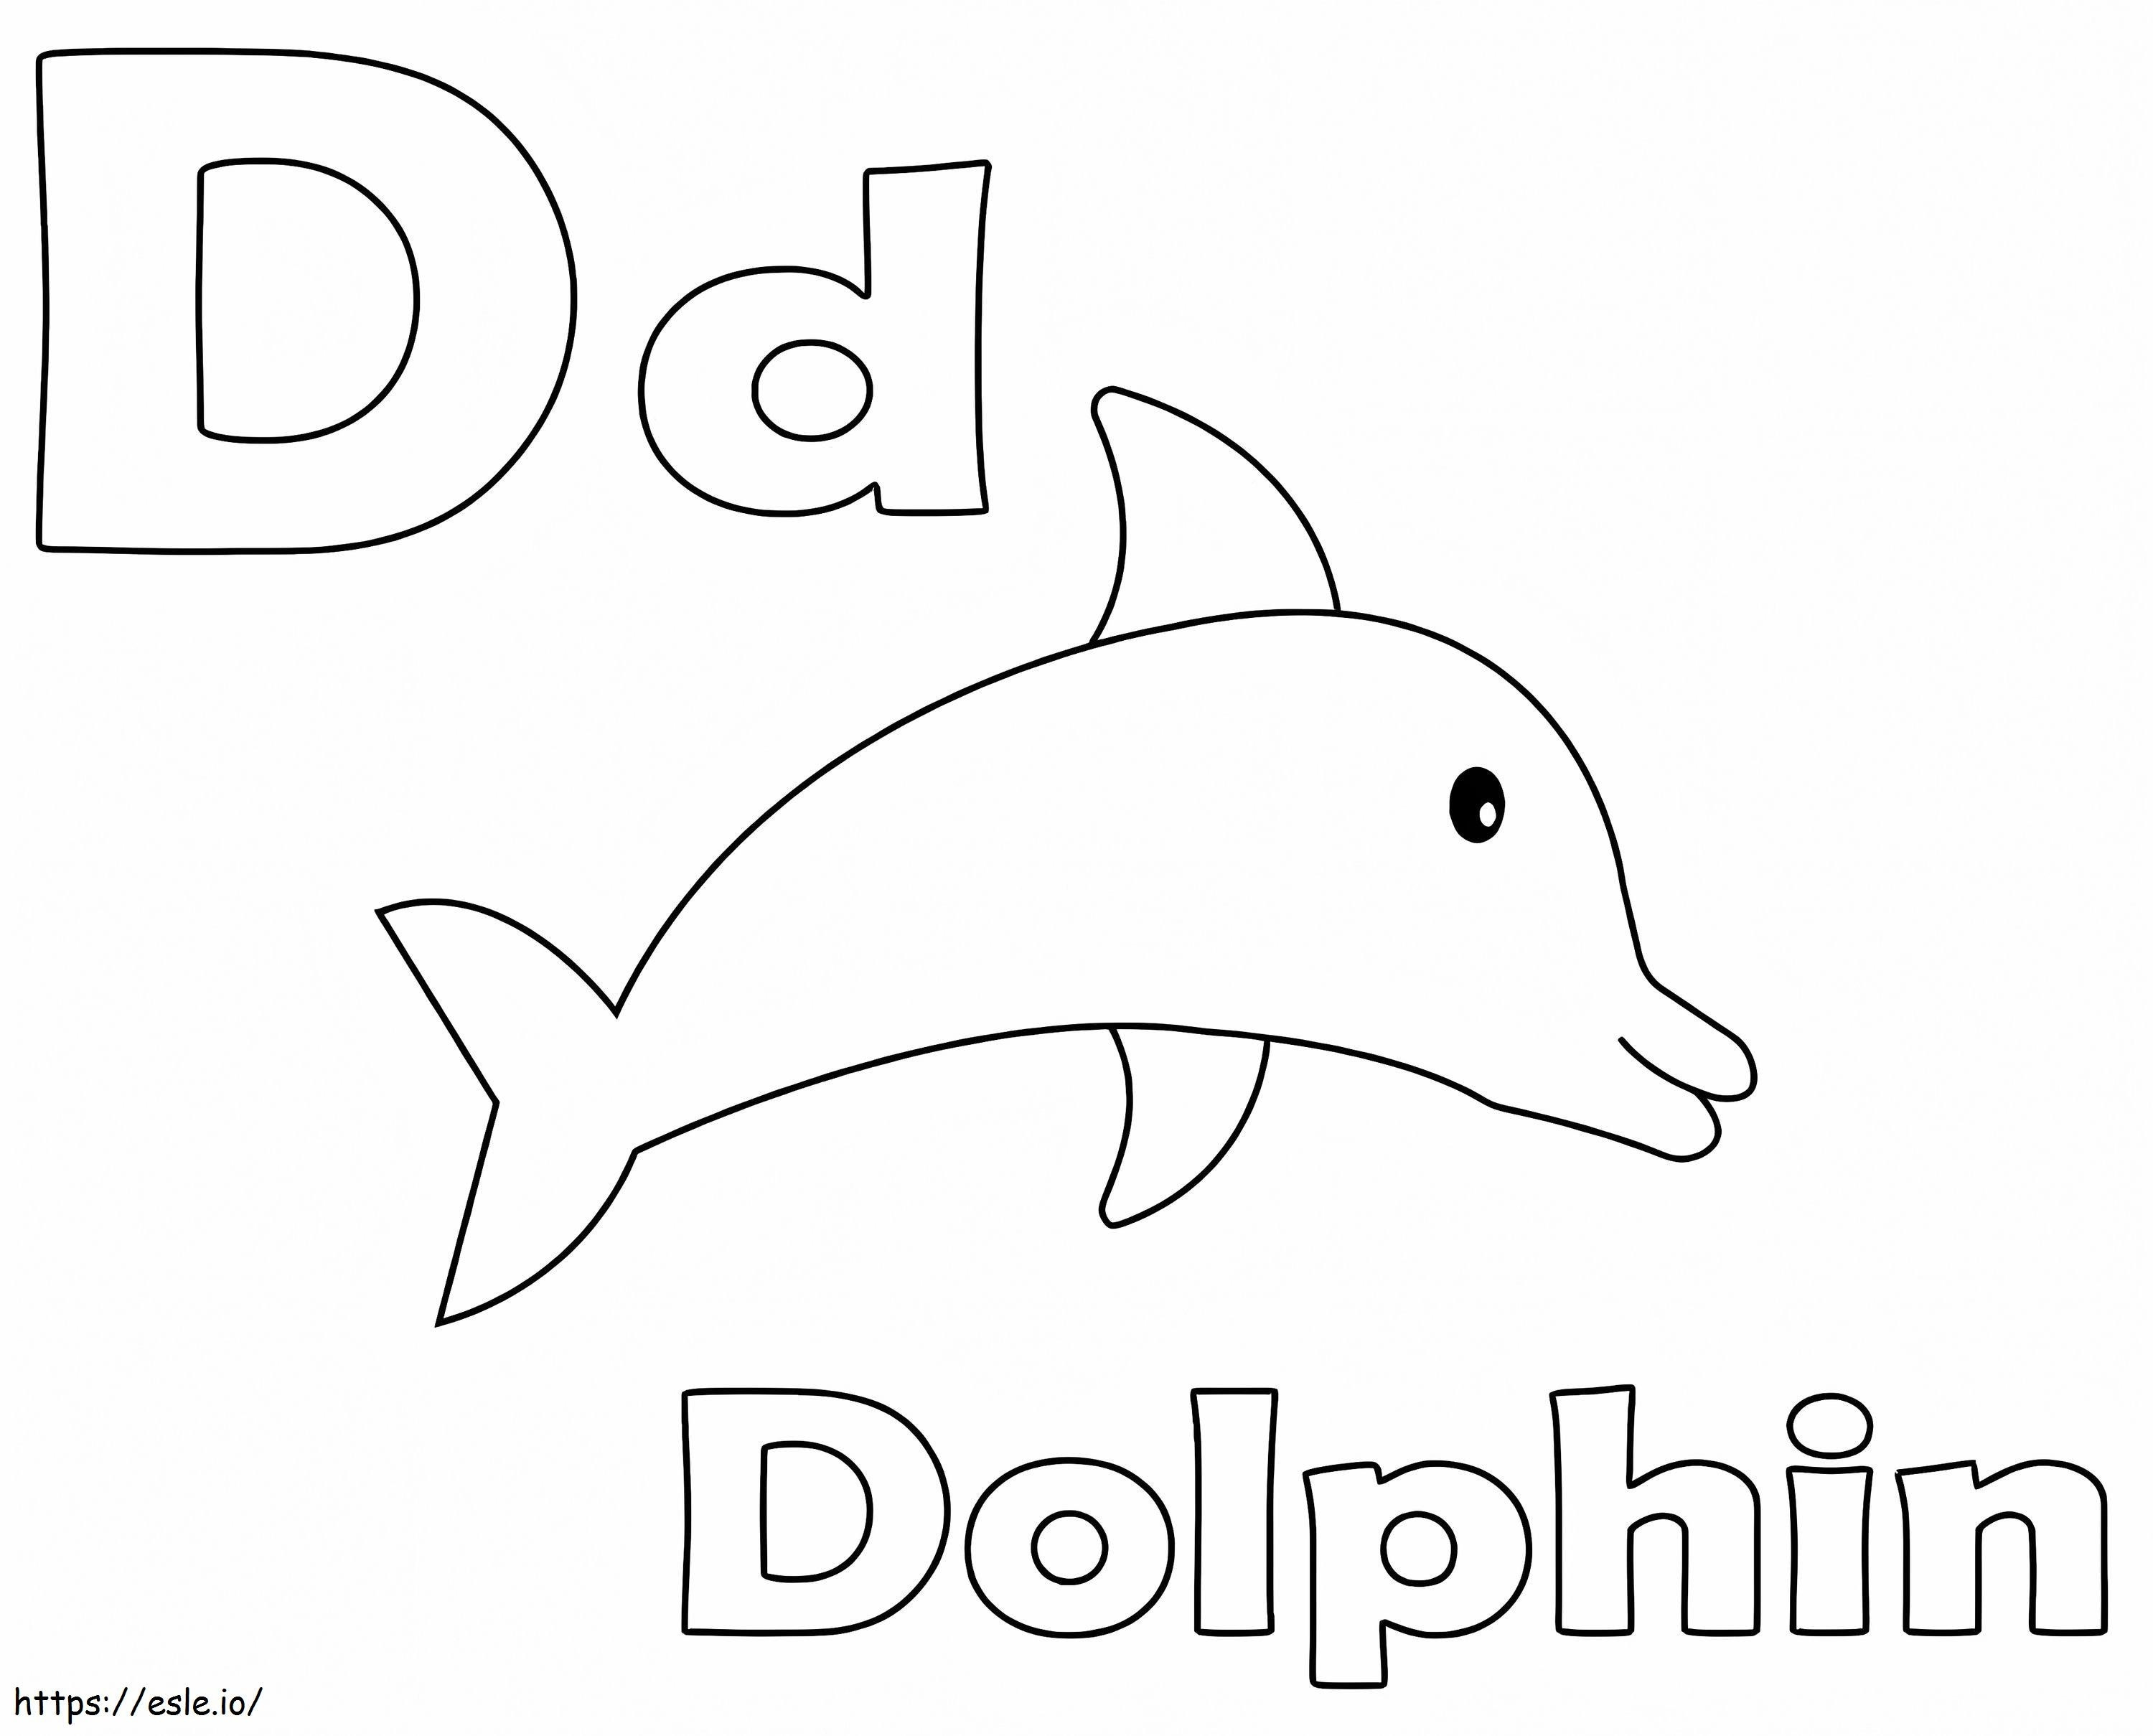 Letter D Dolphin coloring page